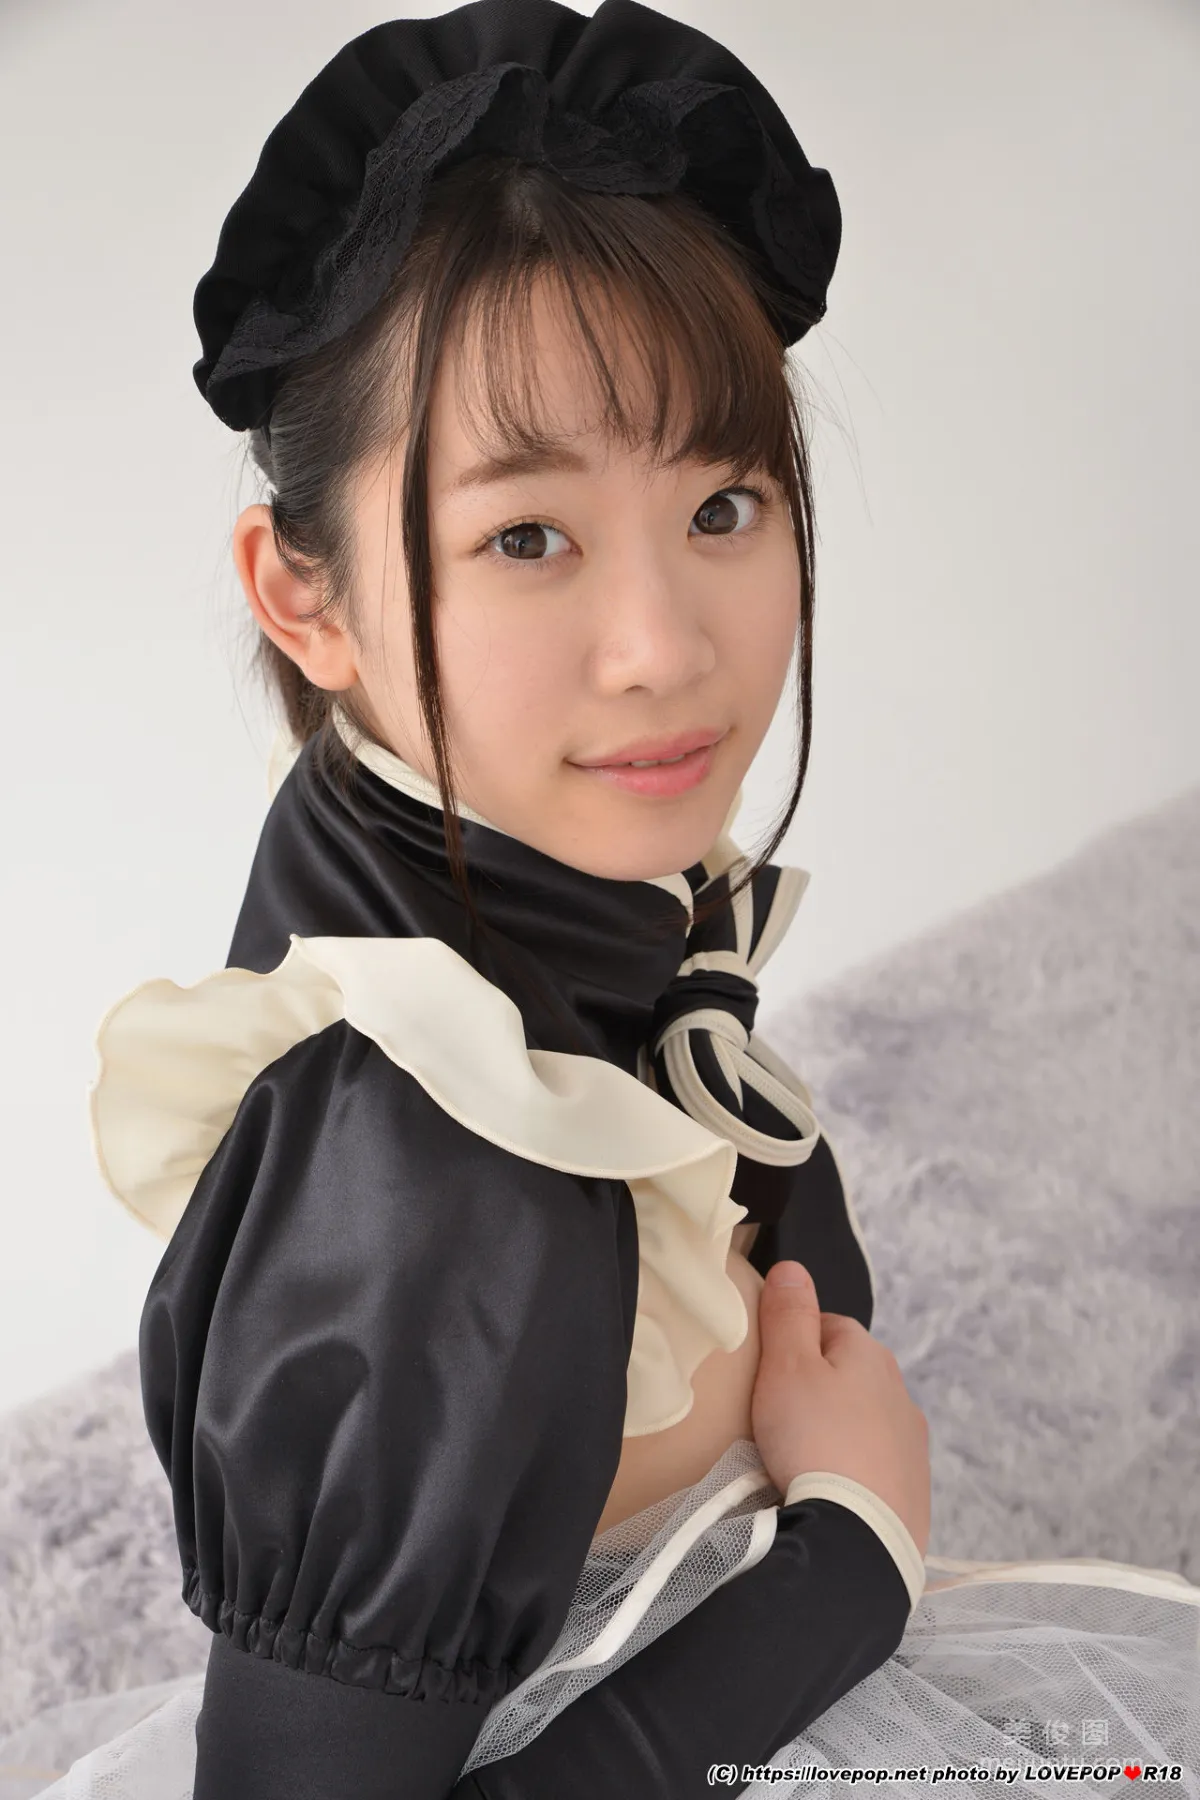 [LOVEPOP] Special Maid Collection - 架乃ゆら Photoset 0259